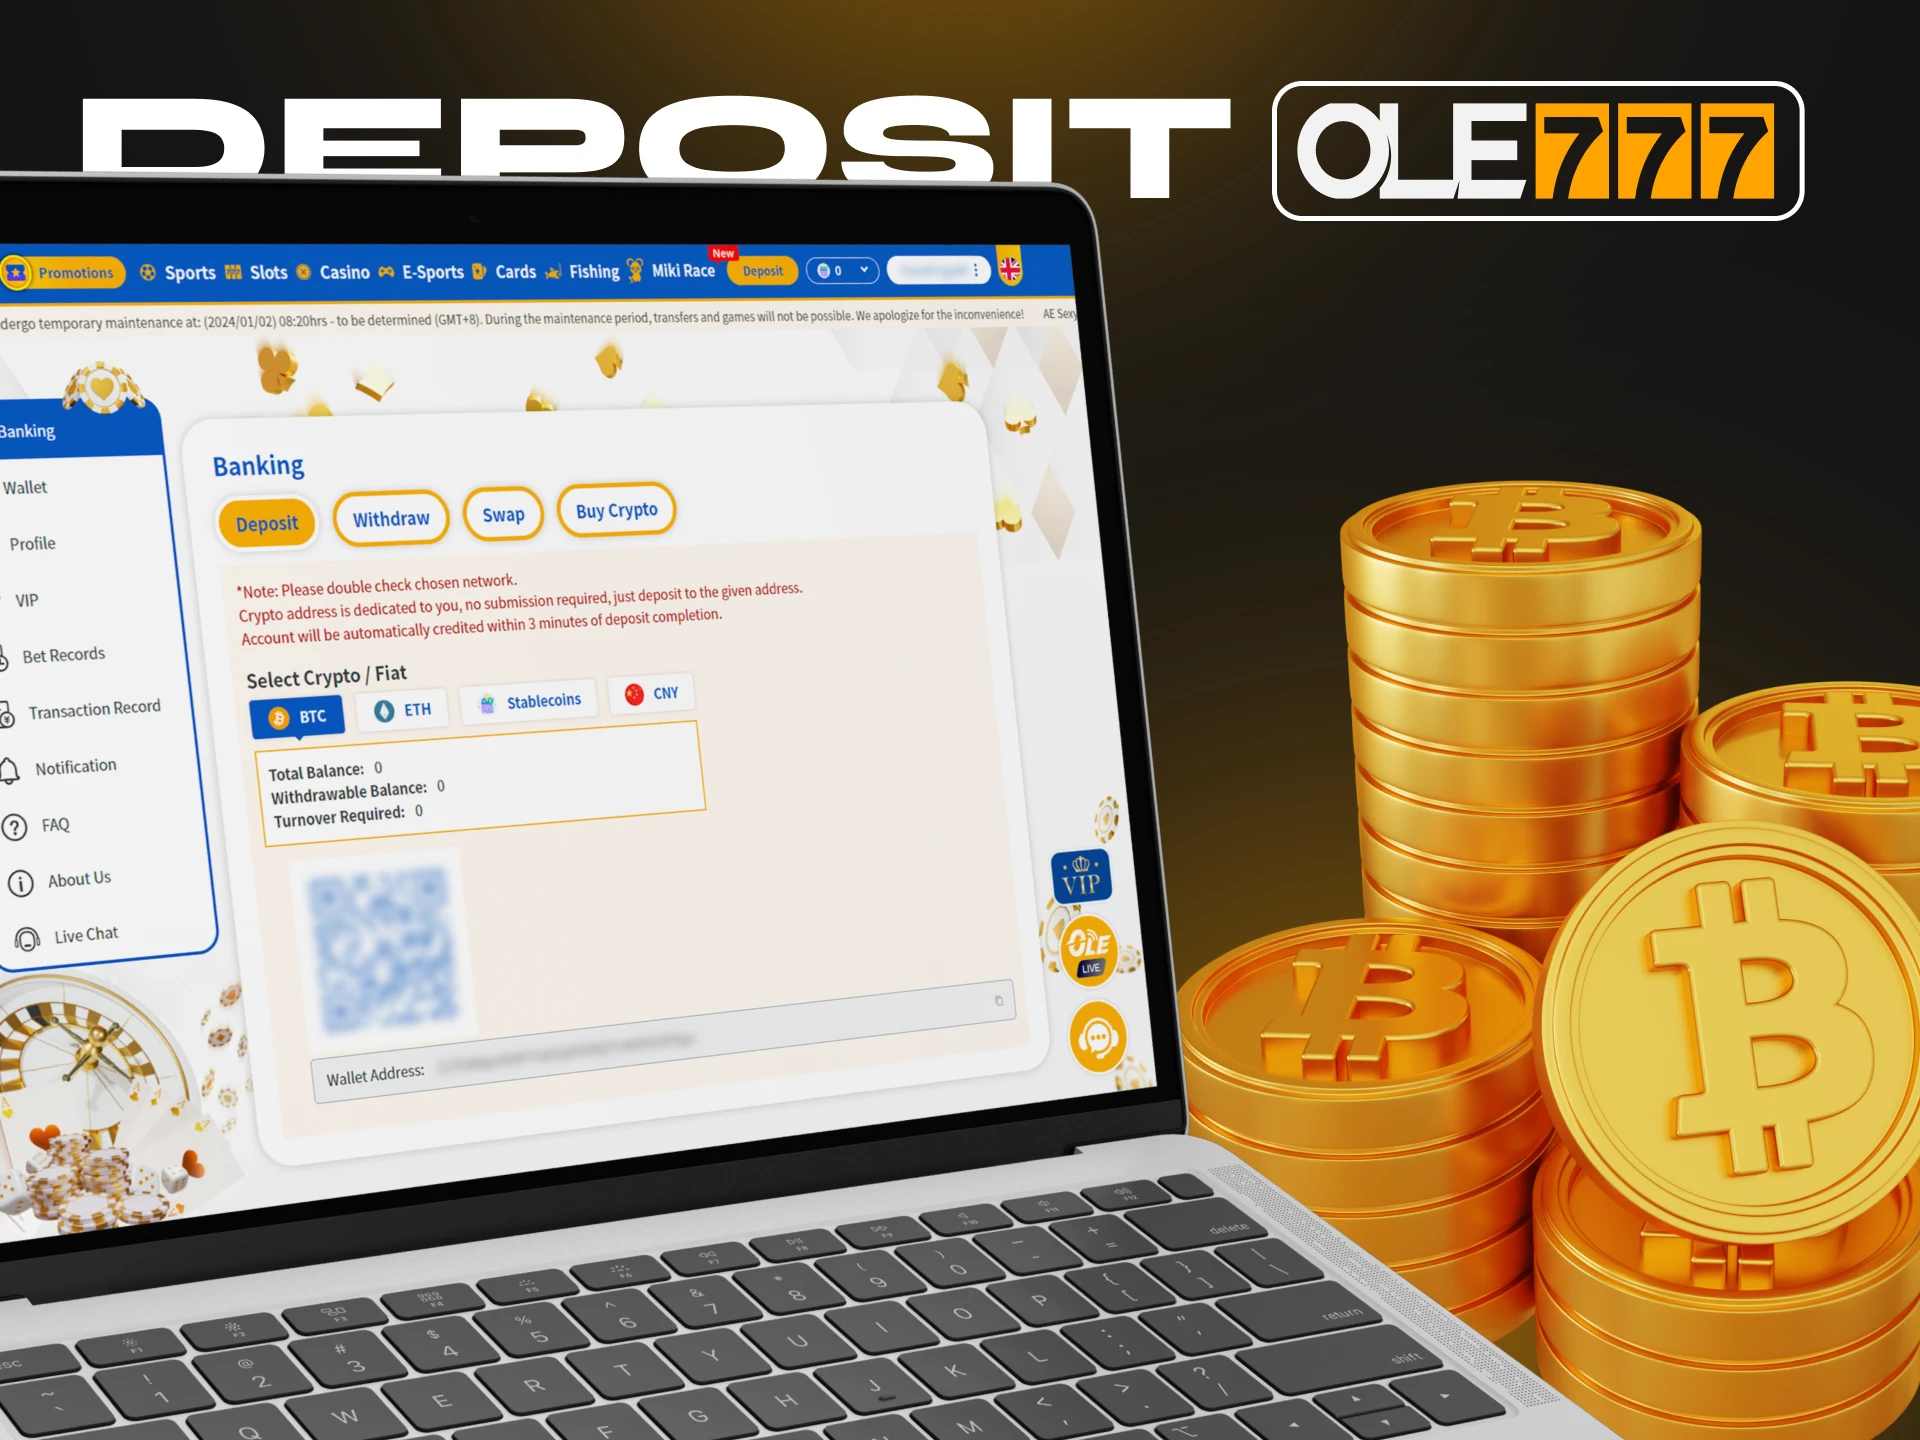 Deposit money into your Ole777 account using a popular cryptocurrency.